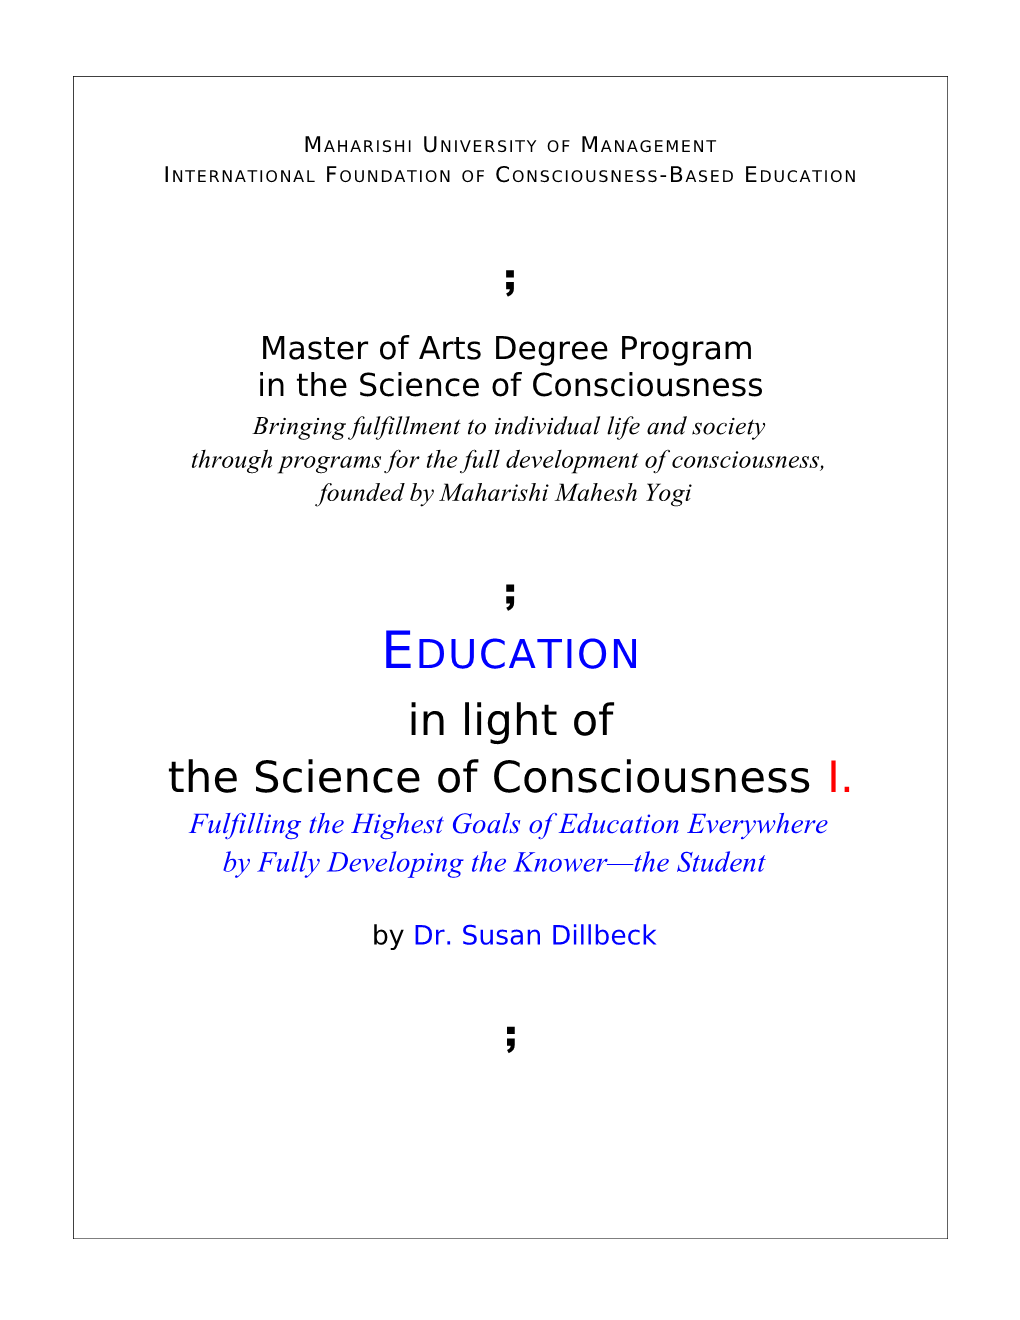 Syllabus for Education in Light of the Science of Consciousness M.A. in Science of Consciousness